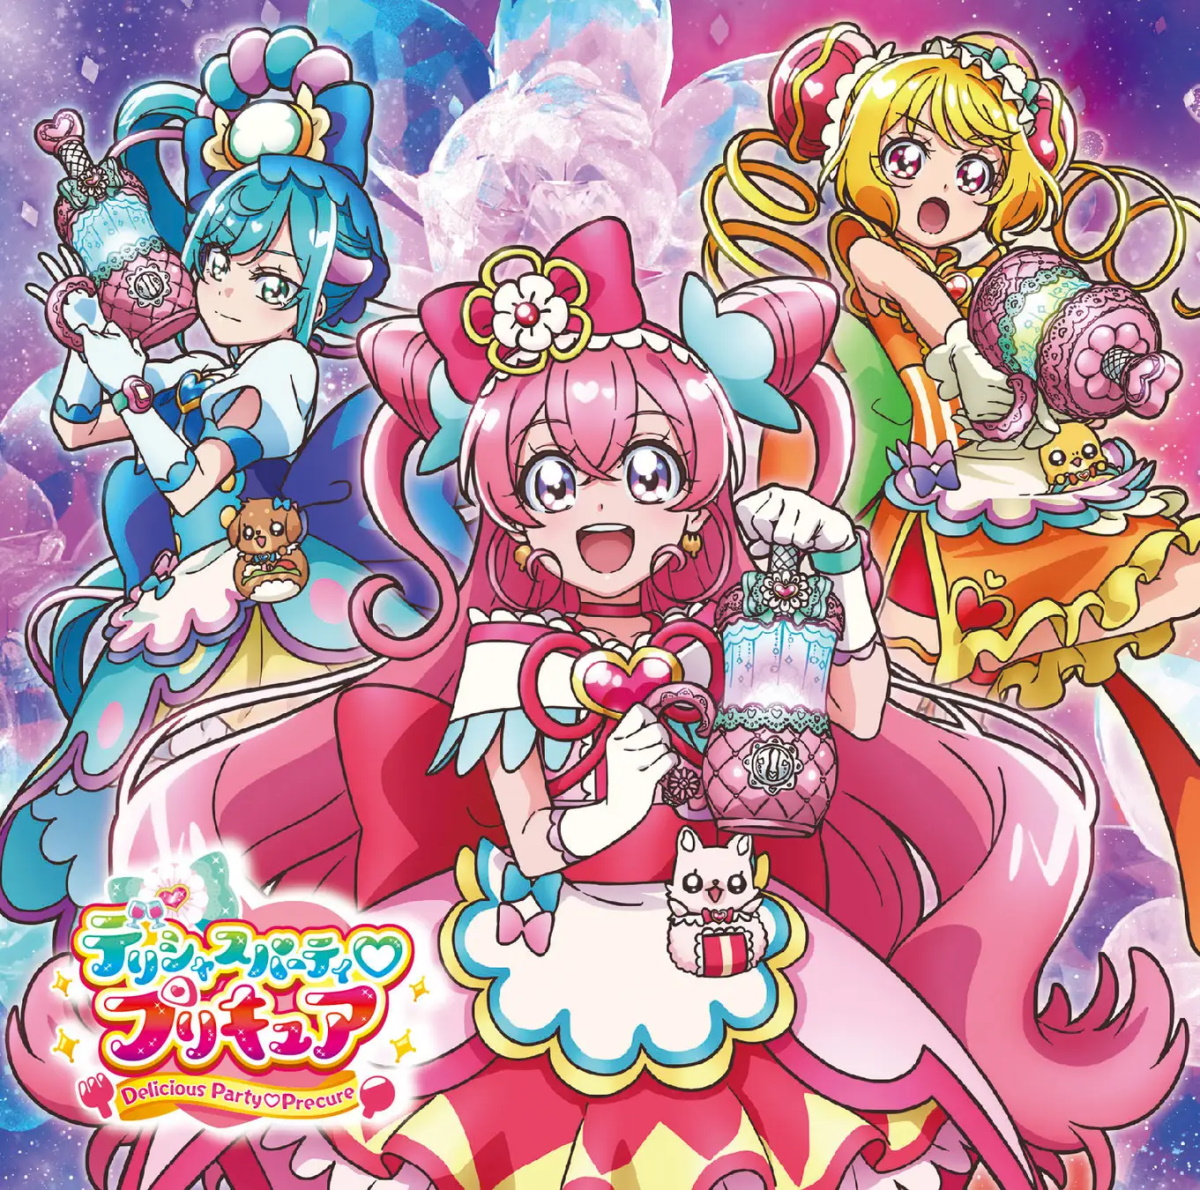 Cover art for『Machico - Cheers! Delicious Party♡Pretty Cure』from the release『Delicious Party♡Pretty Cure Theme Song Single』